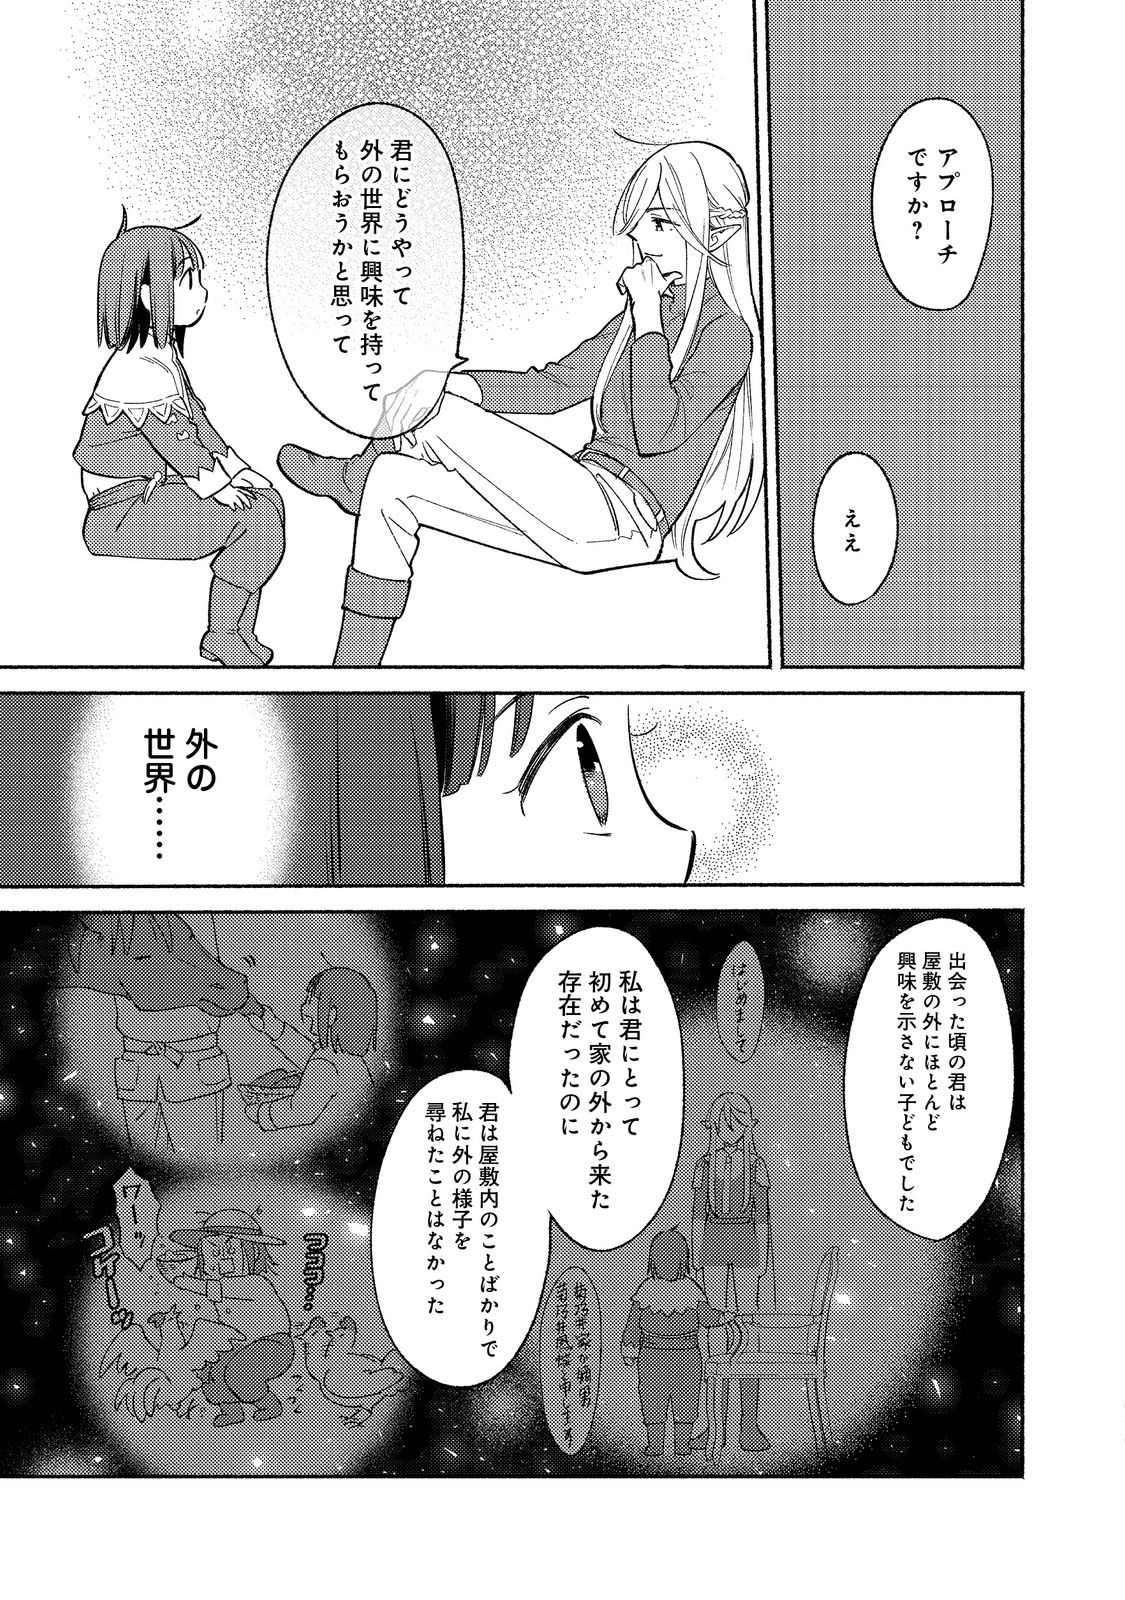 I’m the White Pig Nobleman 第16.1話 - Page 12